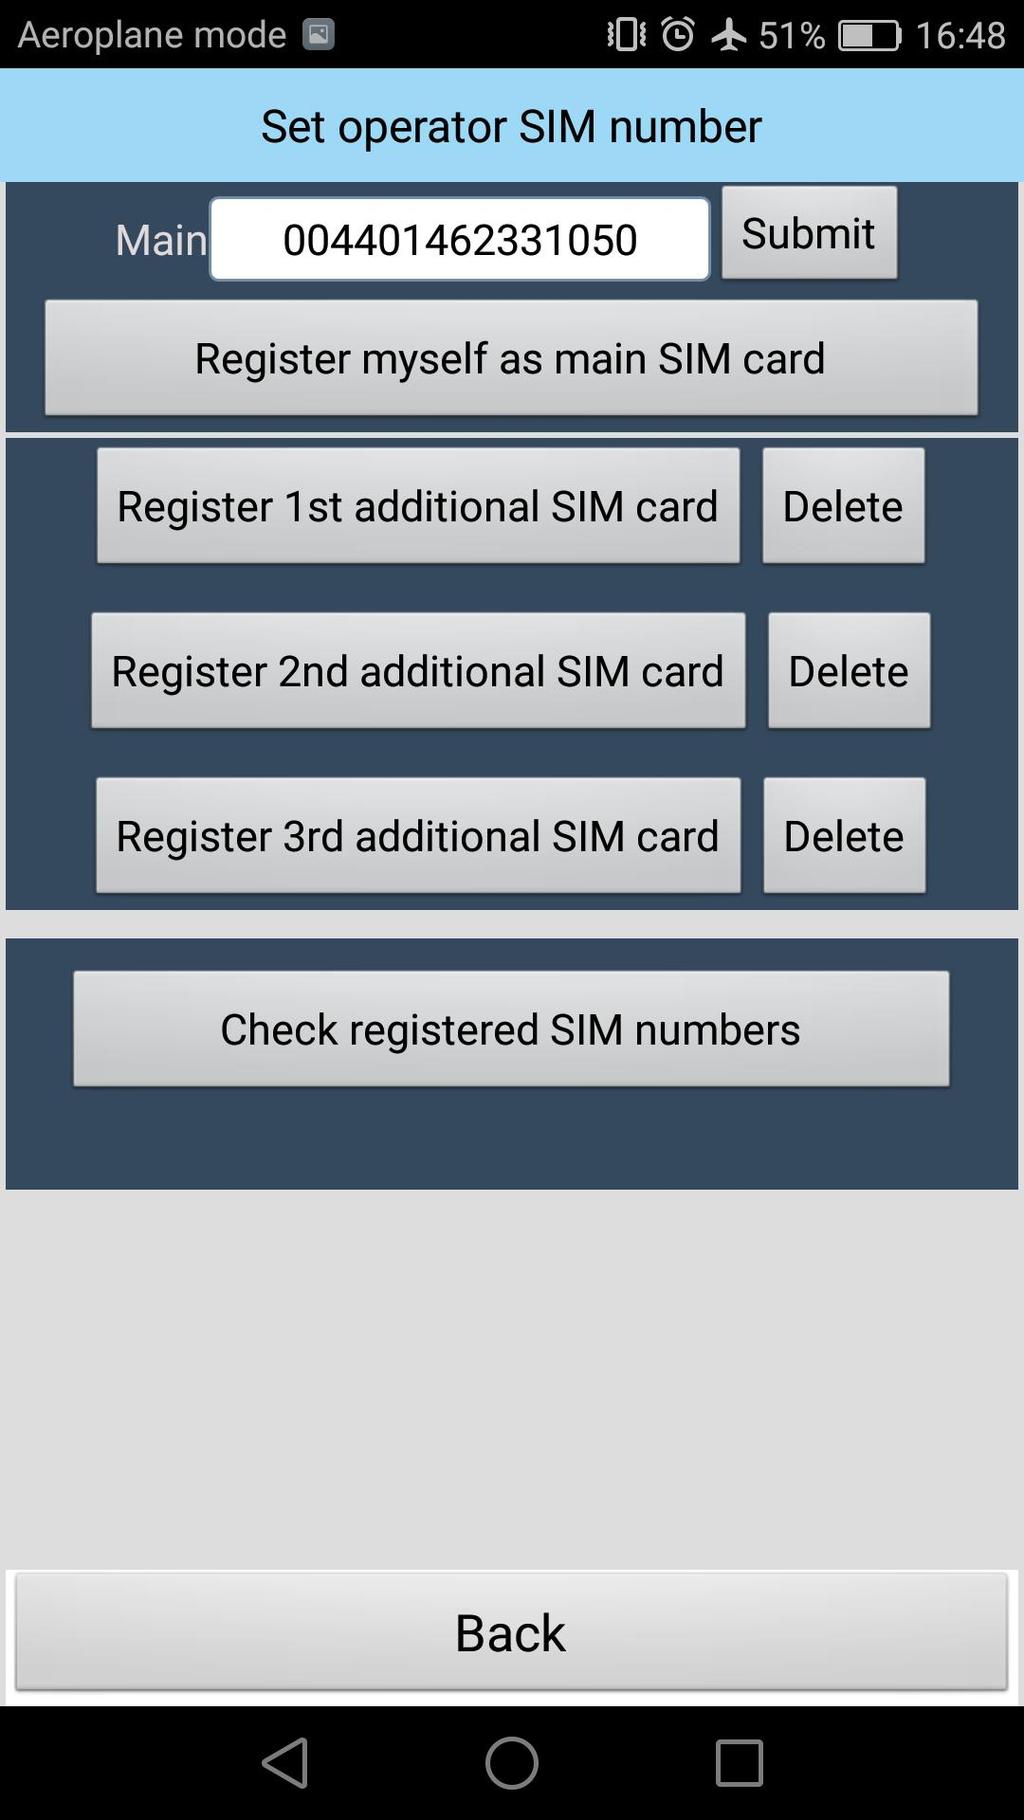 4.3 Register SIM cards QK-G031 allows one mobile phone to function as the main terminal and up to 3 additional phones to function as control terminals.